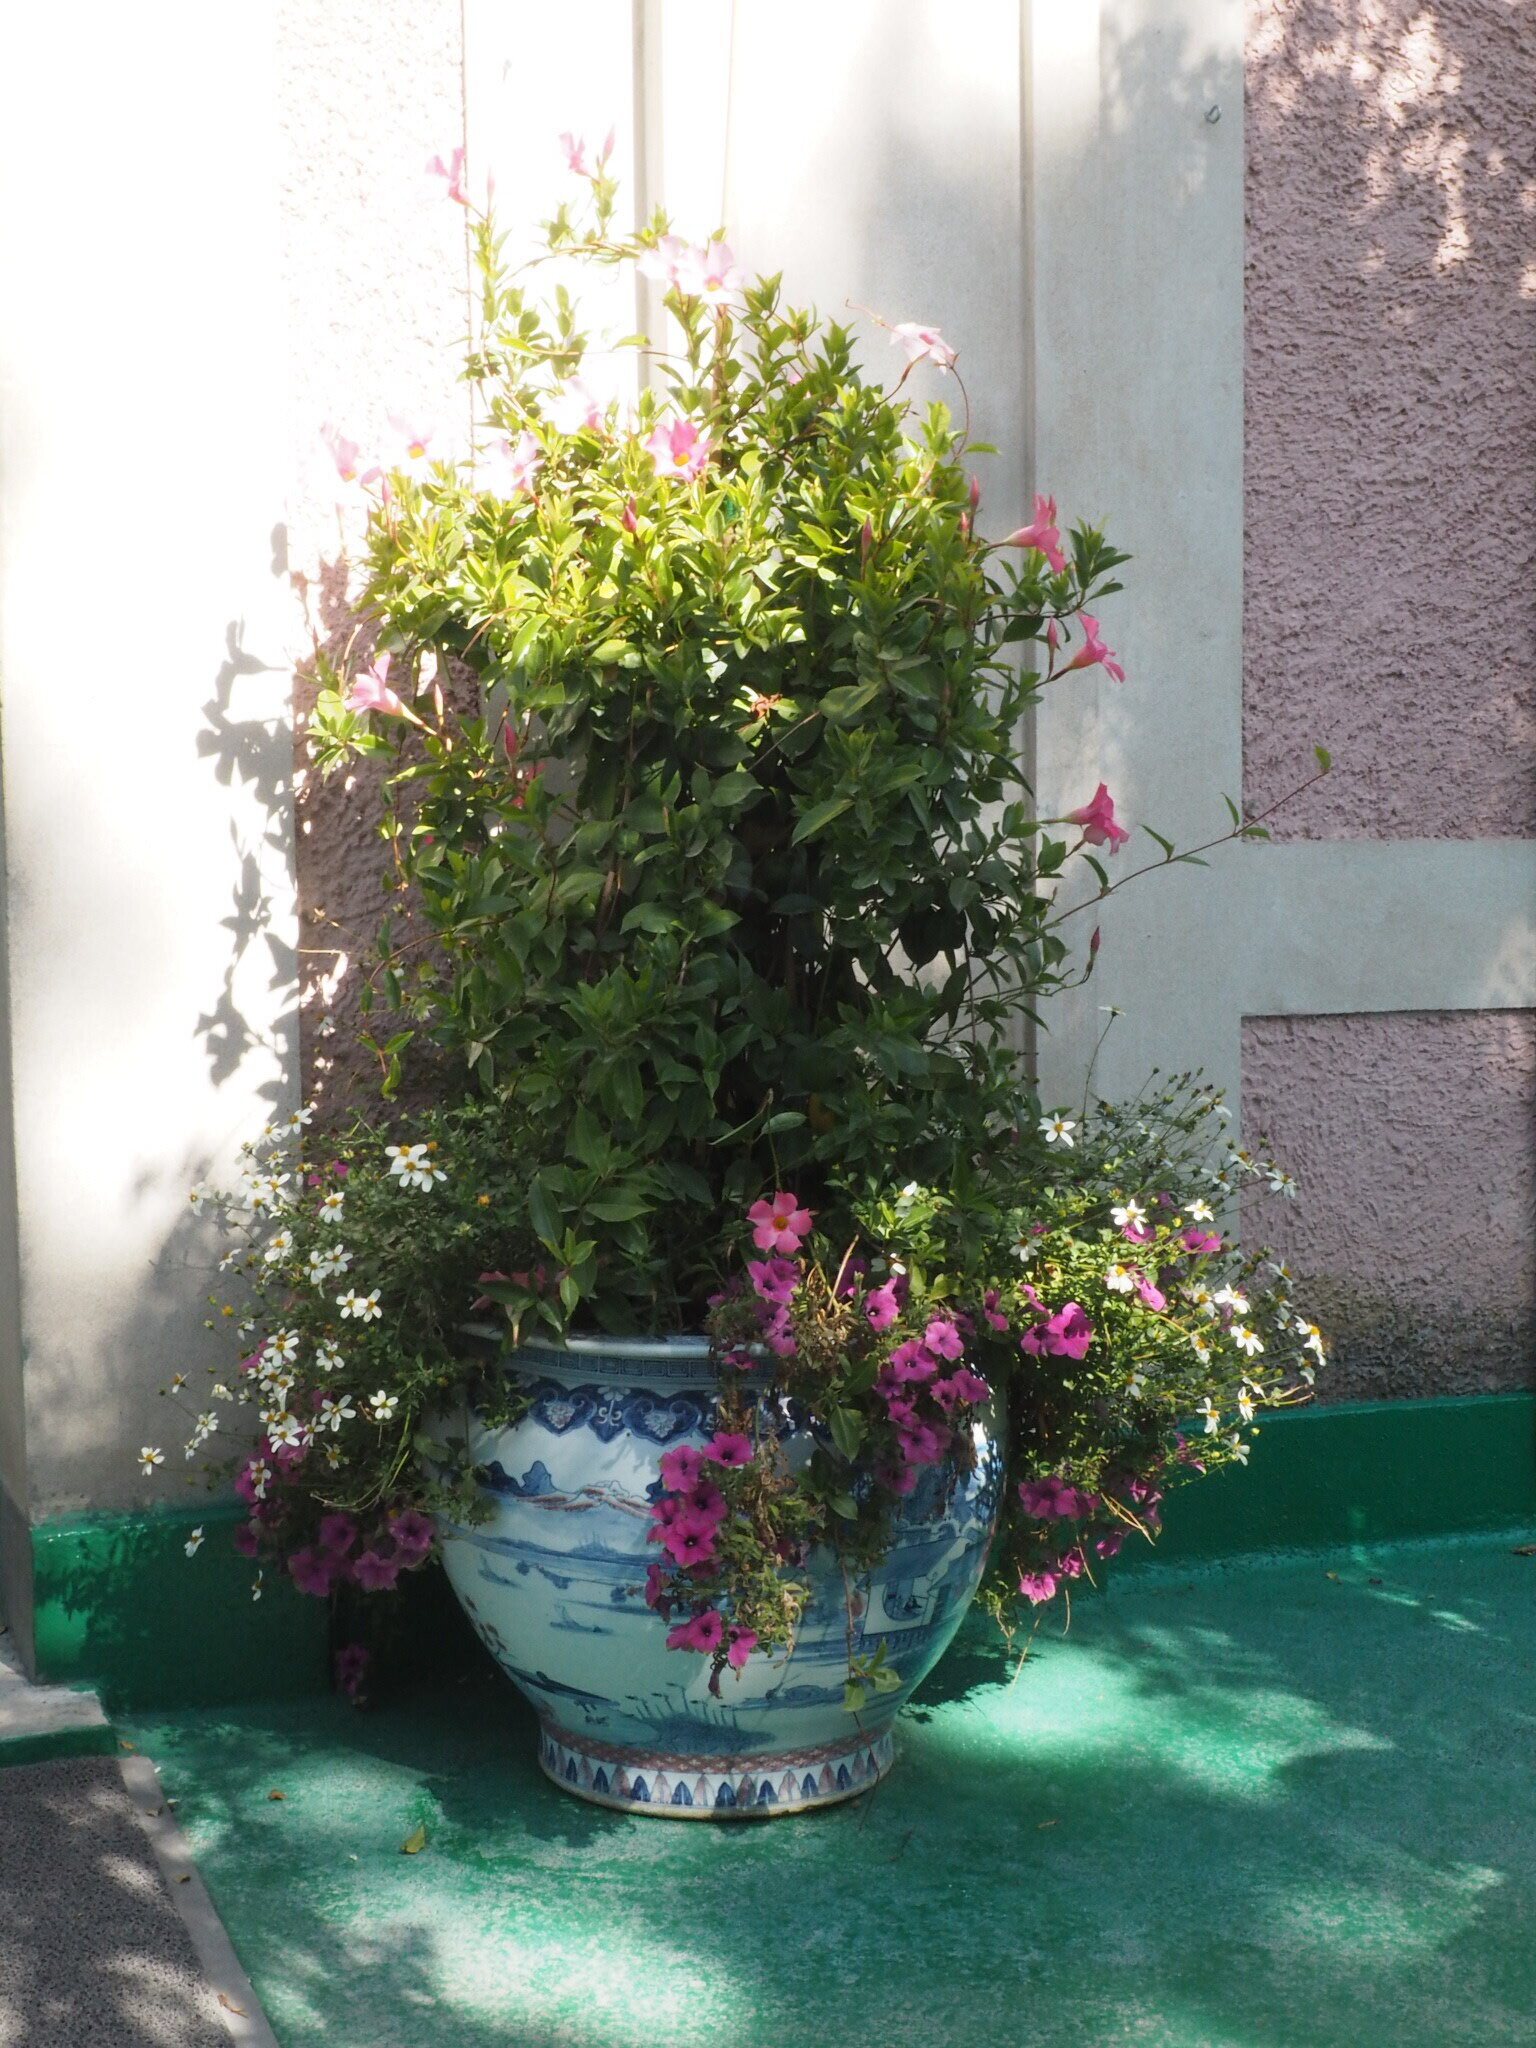 I loved this blue-and-white container planting on the terrace